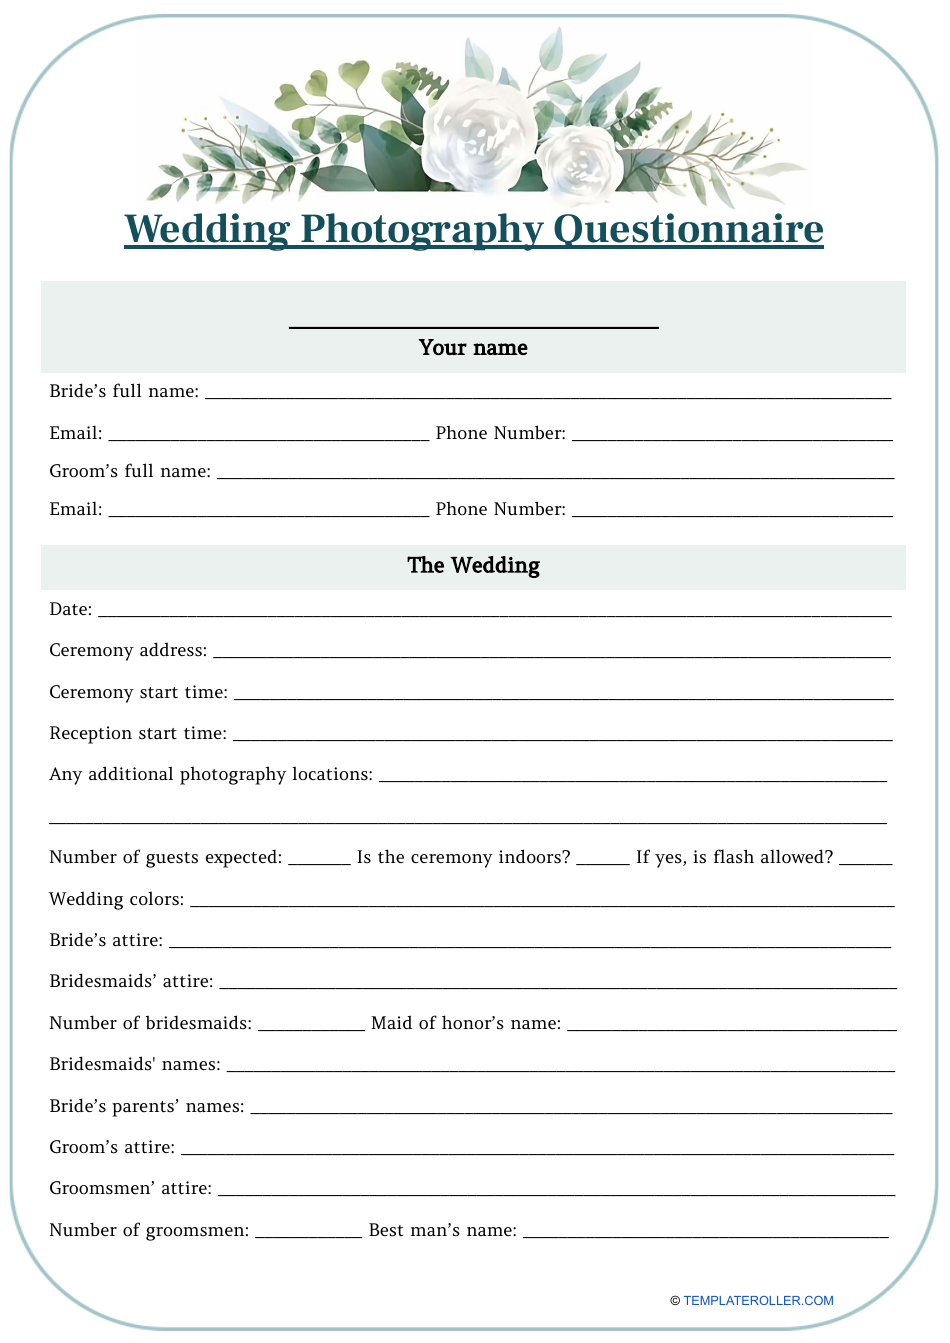 wedding-photography-questionnaire-template-download-printable-pdf